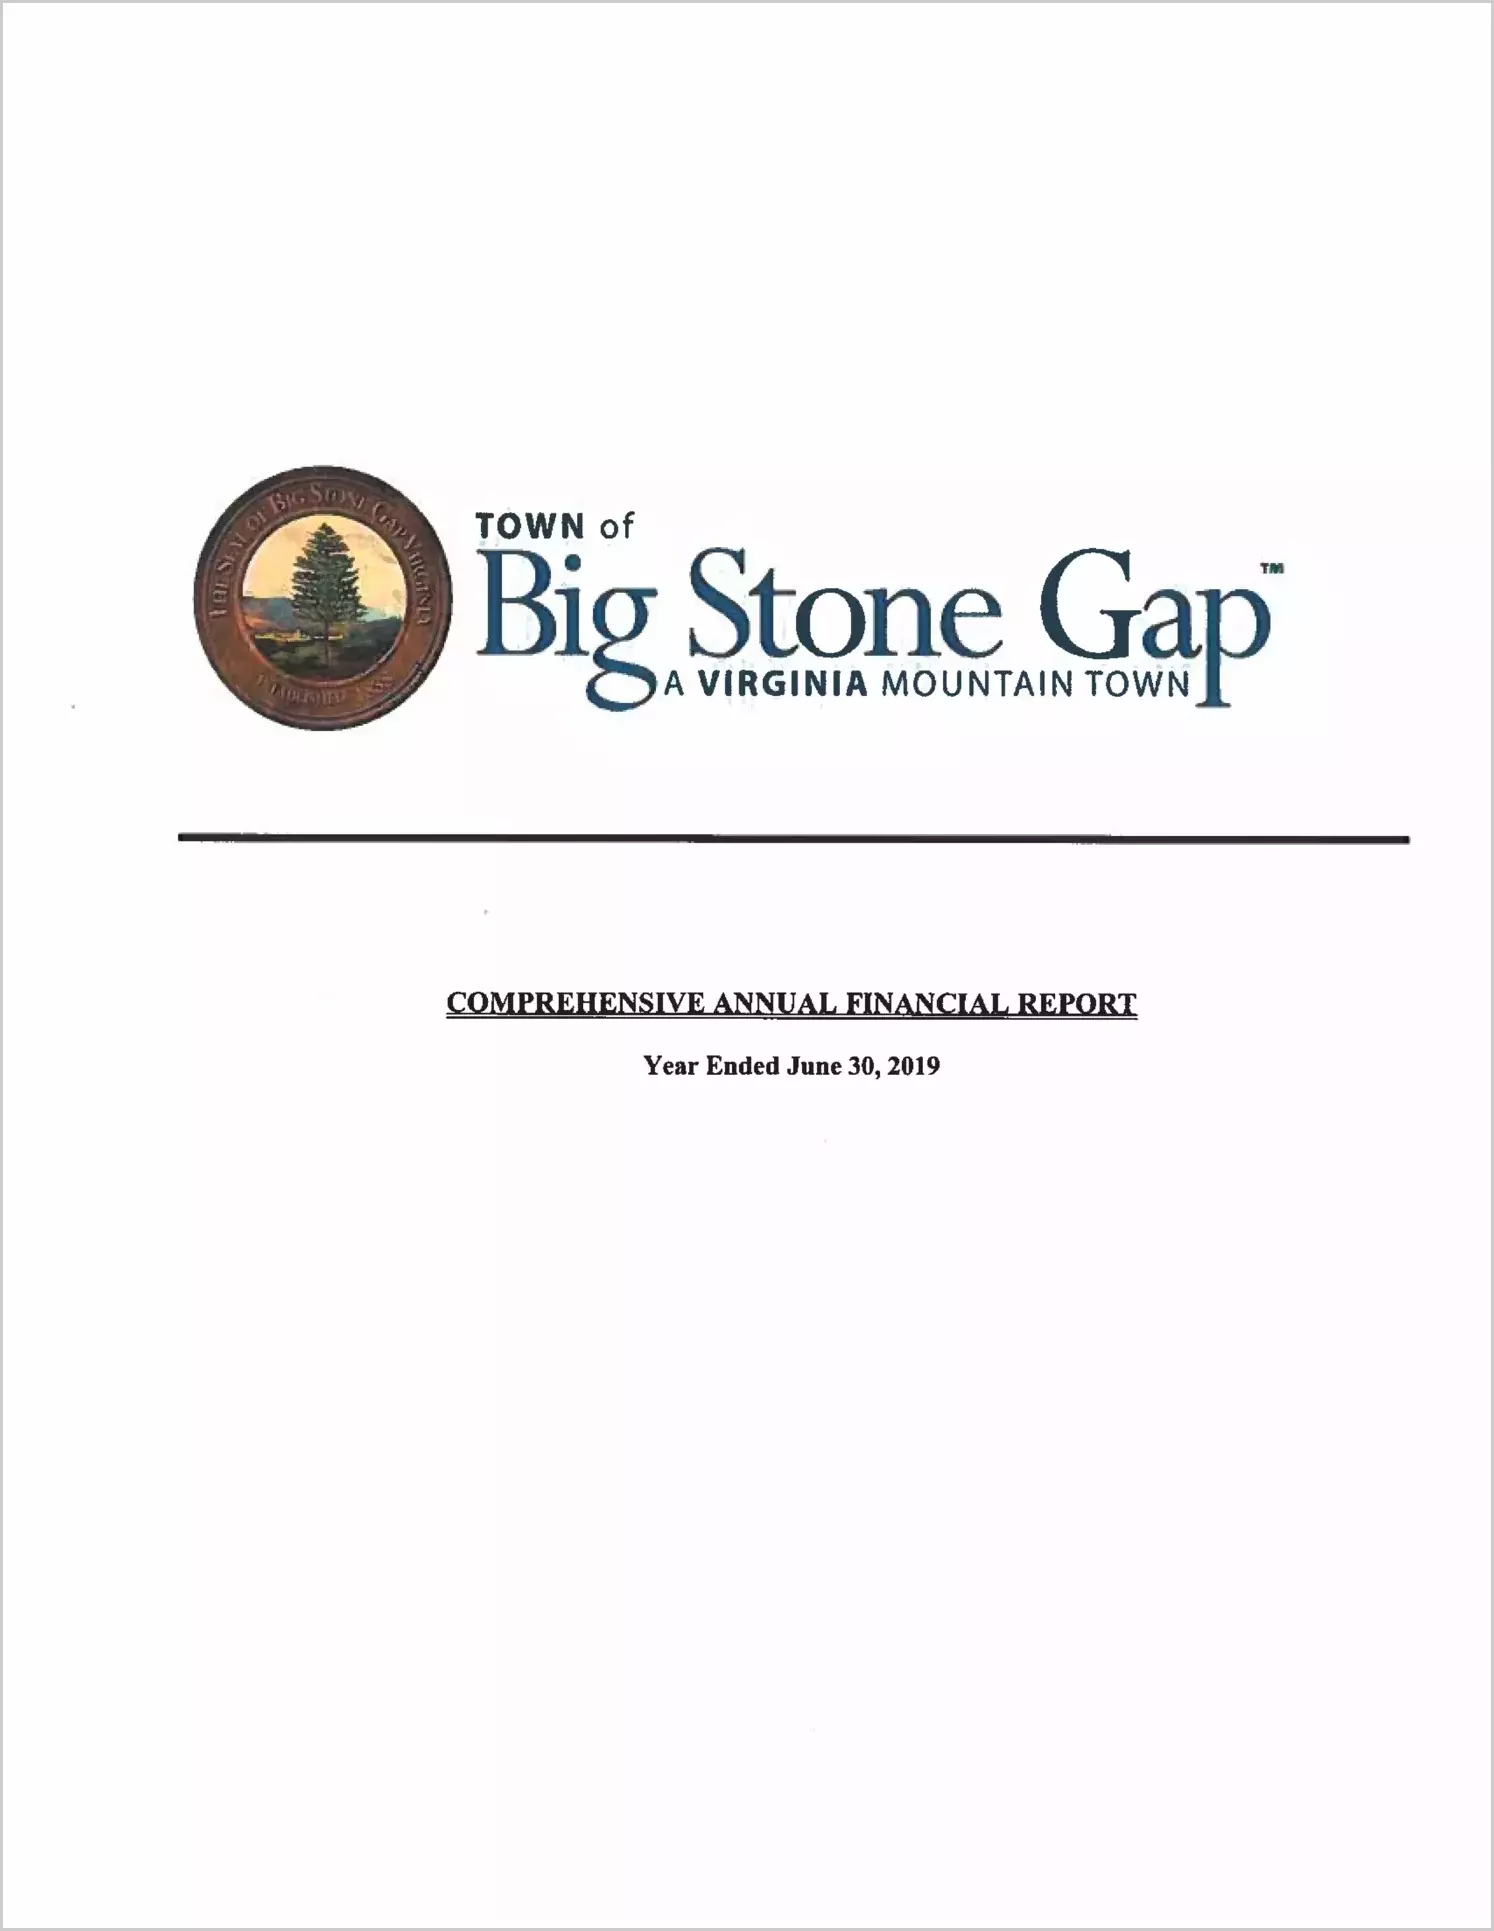 2019 Annual Financial Report for Town of Big Stone Gap